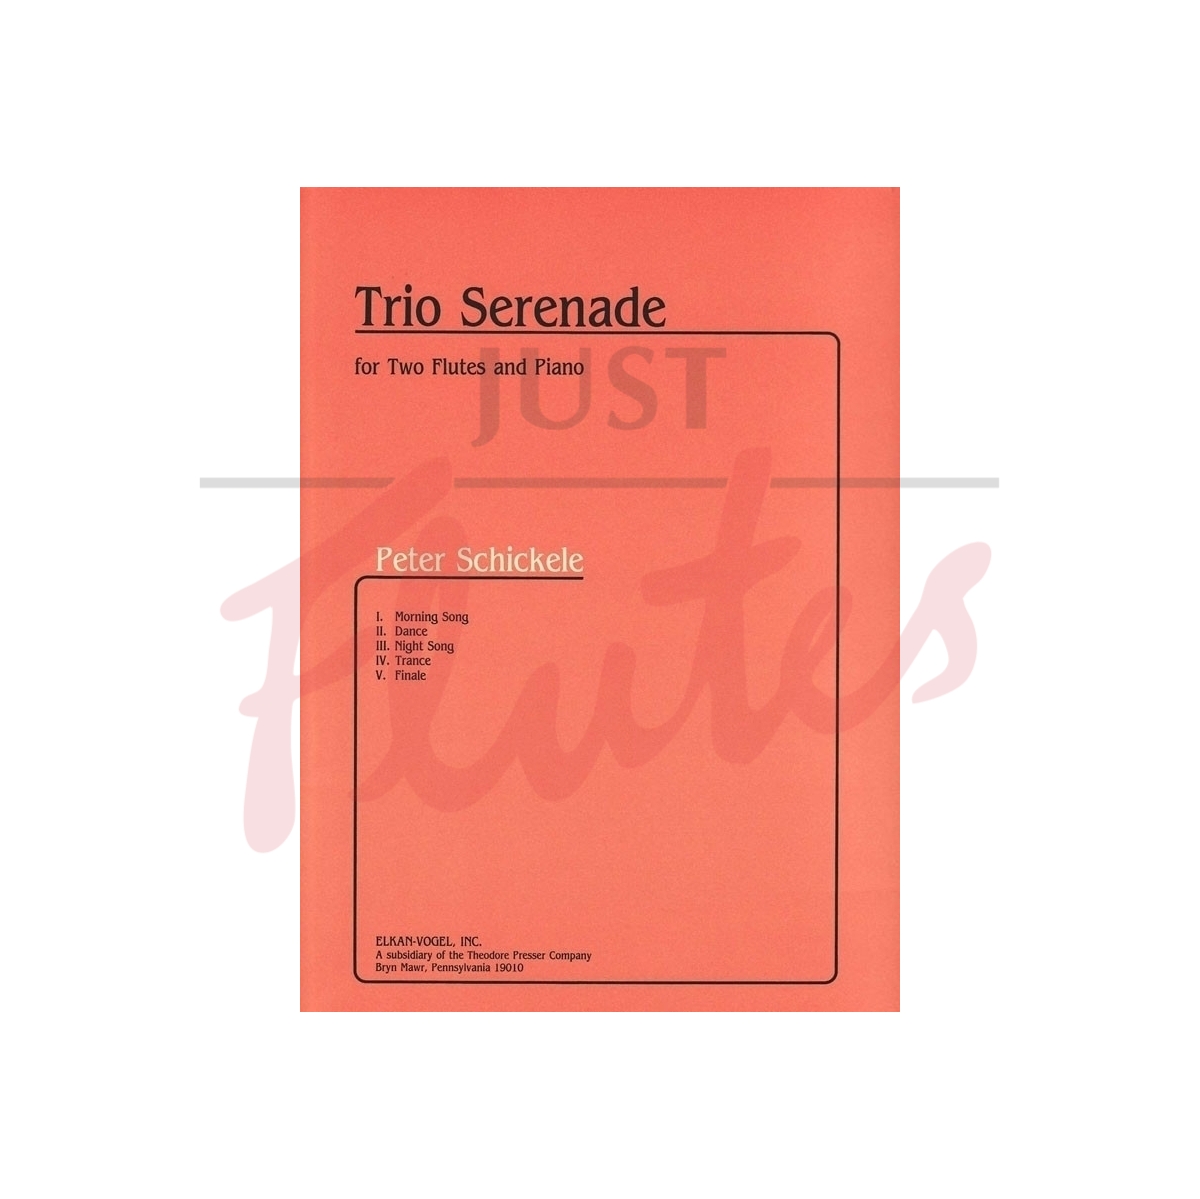 Trio Serenade for Two Flutes and Piano